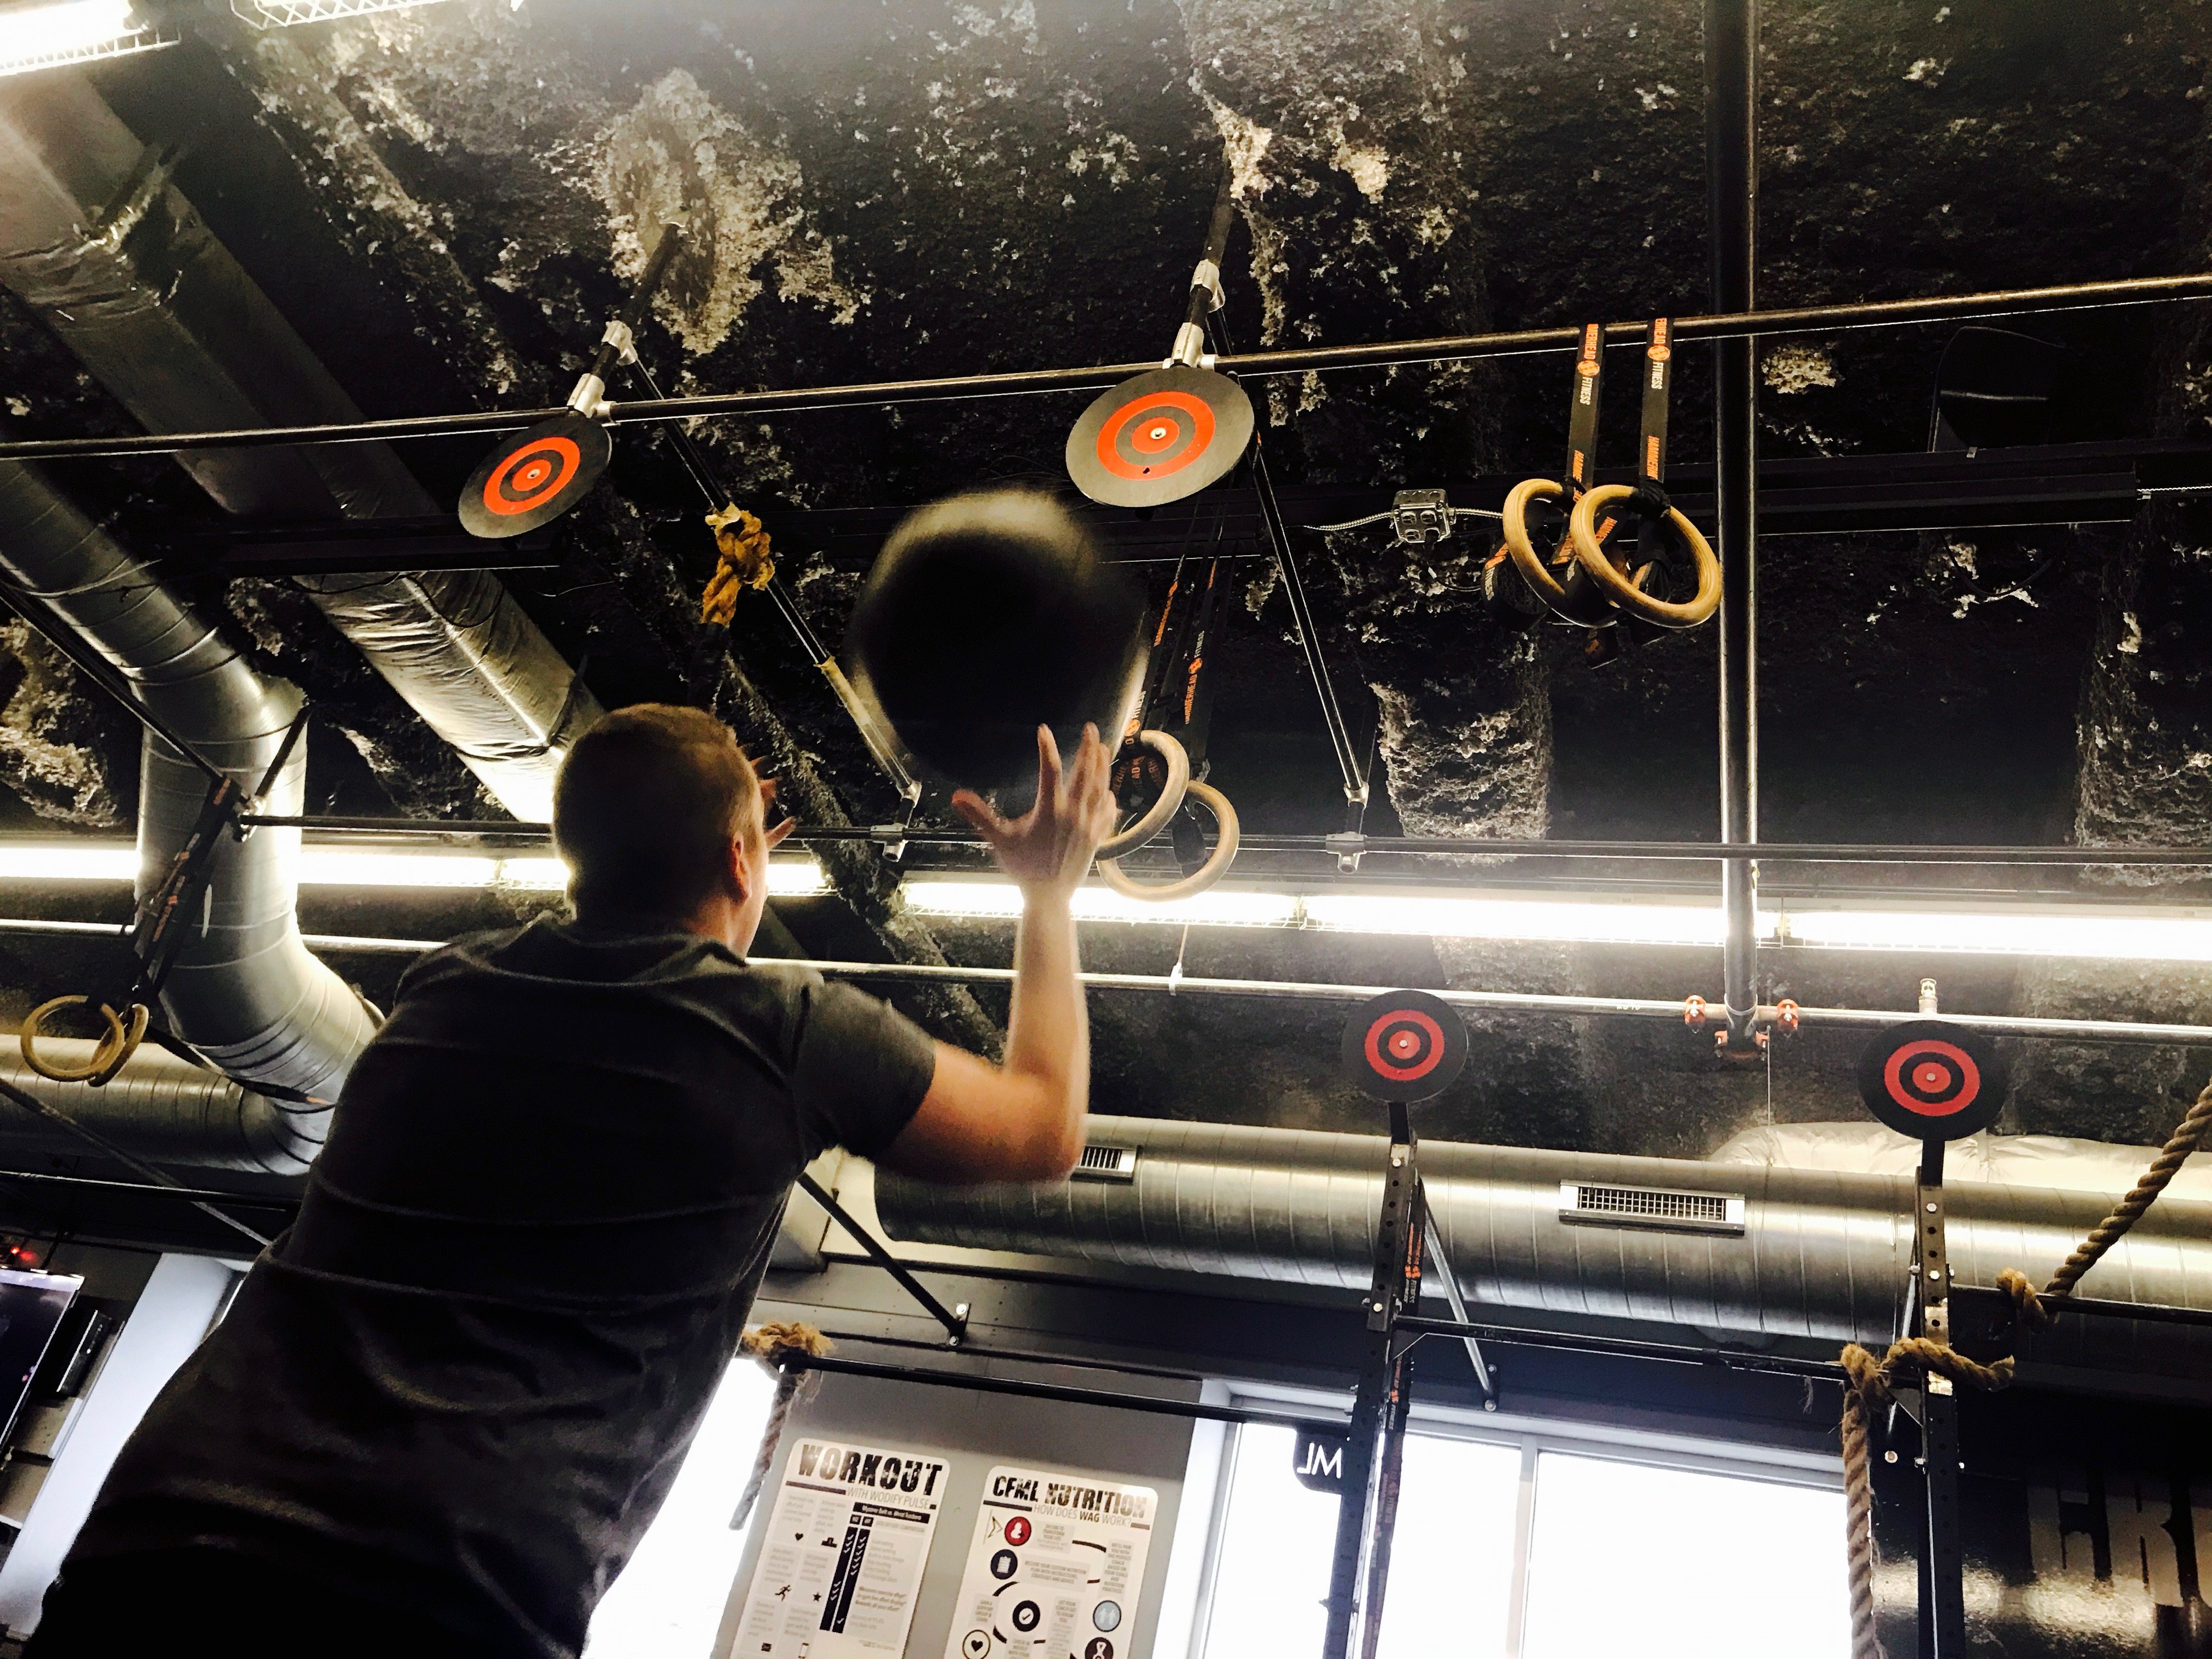 Friday 9.20.19 Workouts – CrossFit Main Line